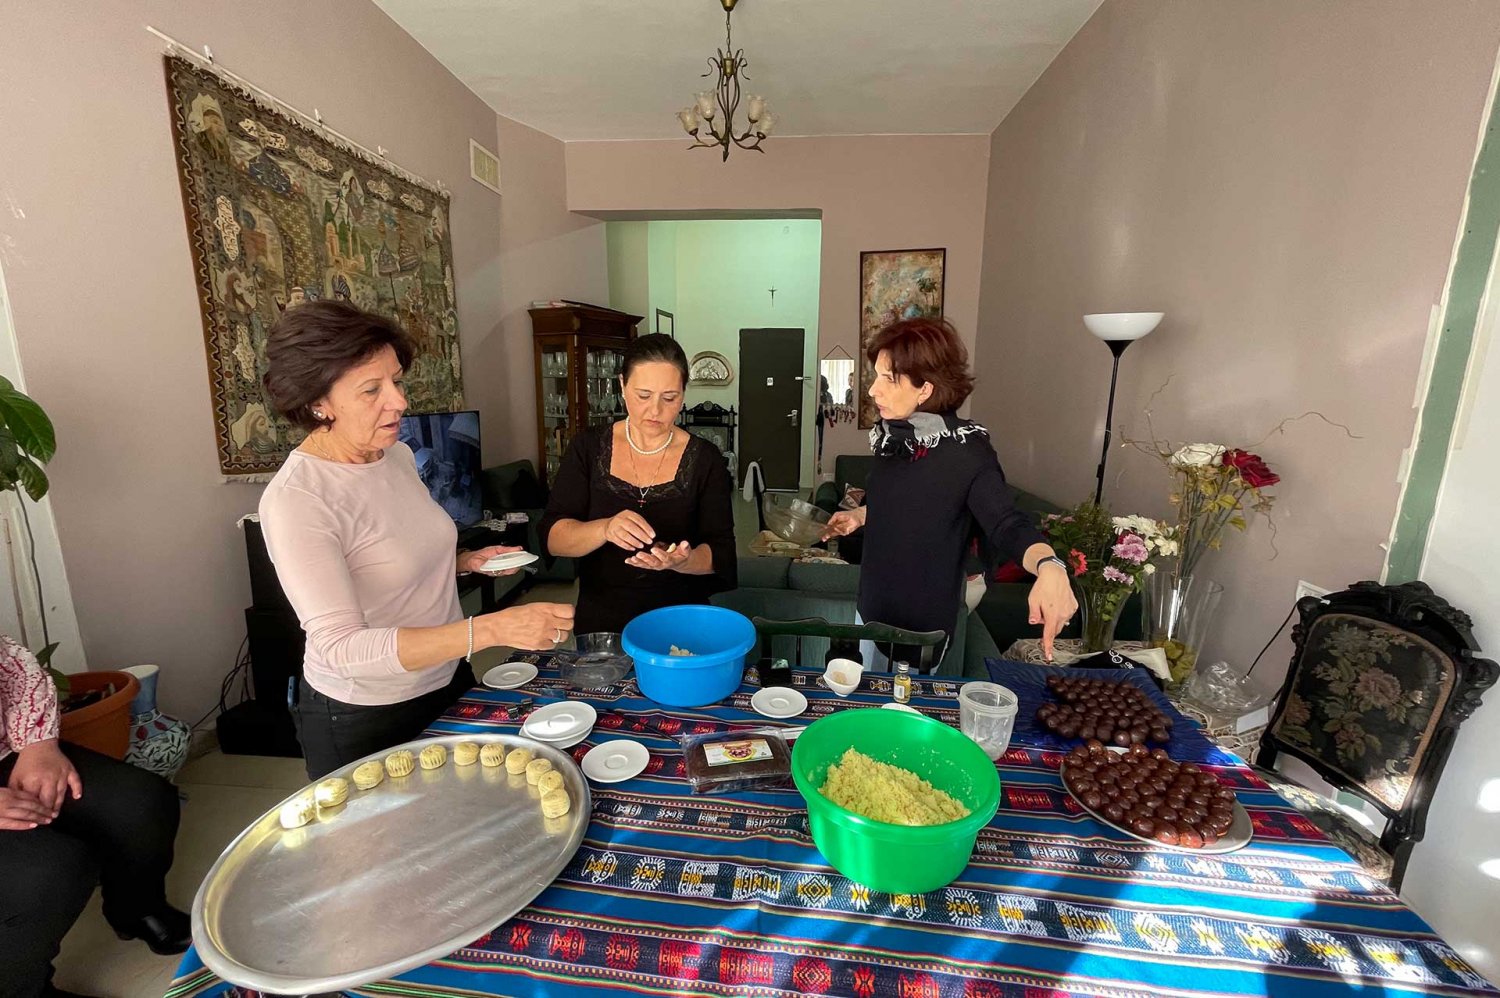 Three Palestinian woman make Middle Eastern pastries at a home in Jerusalem